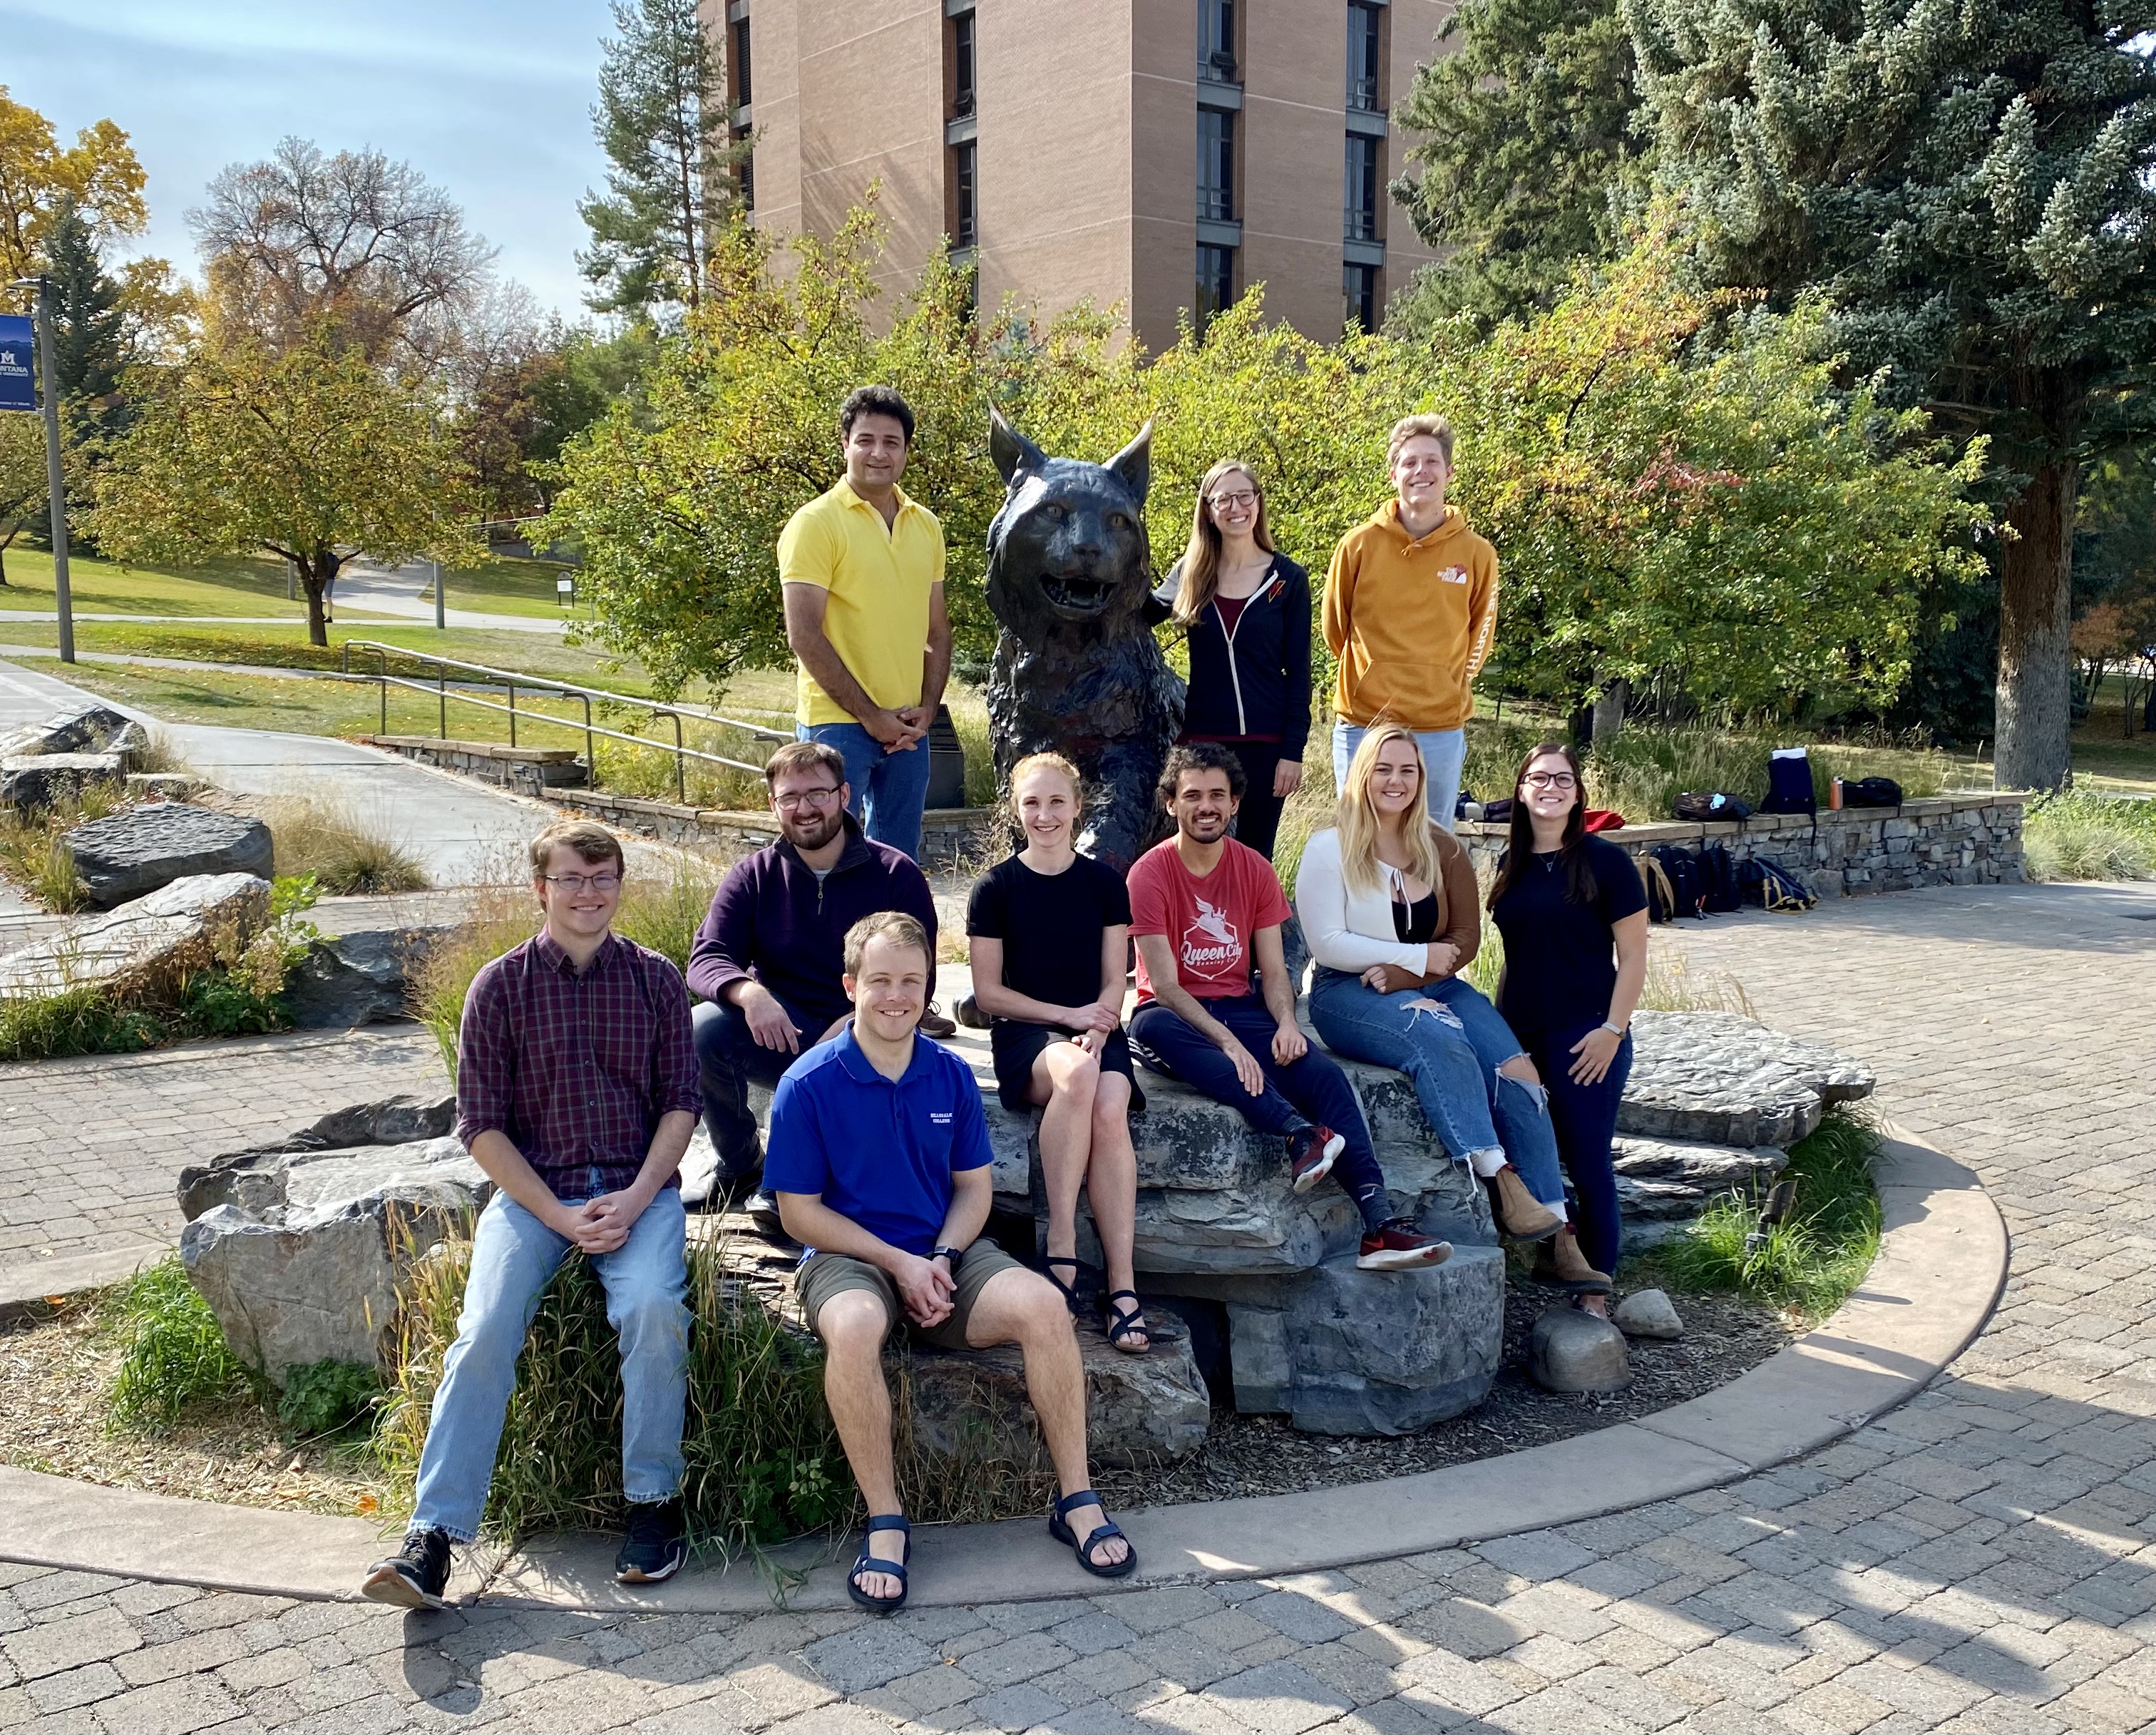 A diverse group of graduate students surround the Champ bobcat statue.